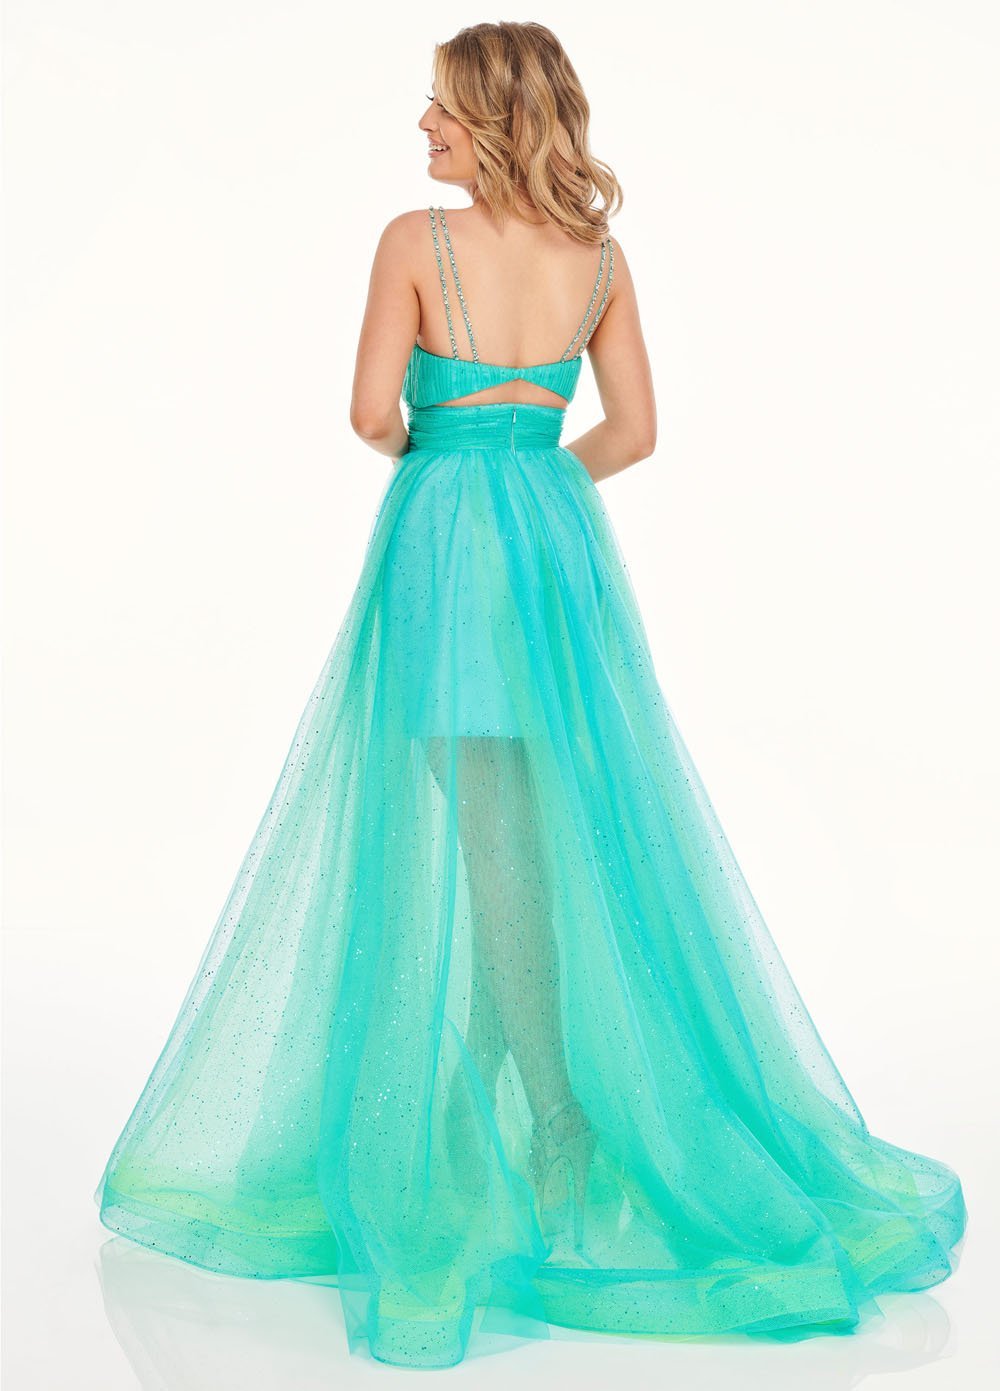 Rachel Allan 70063 dress images in these colors: Coral Iridescent, Turquoise Iridescent.